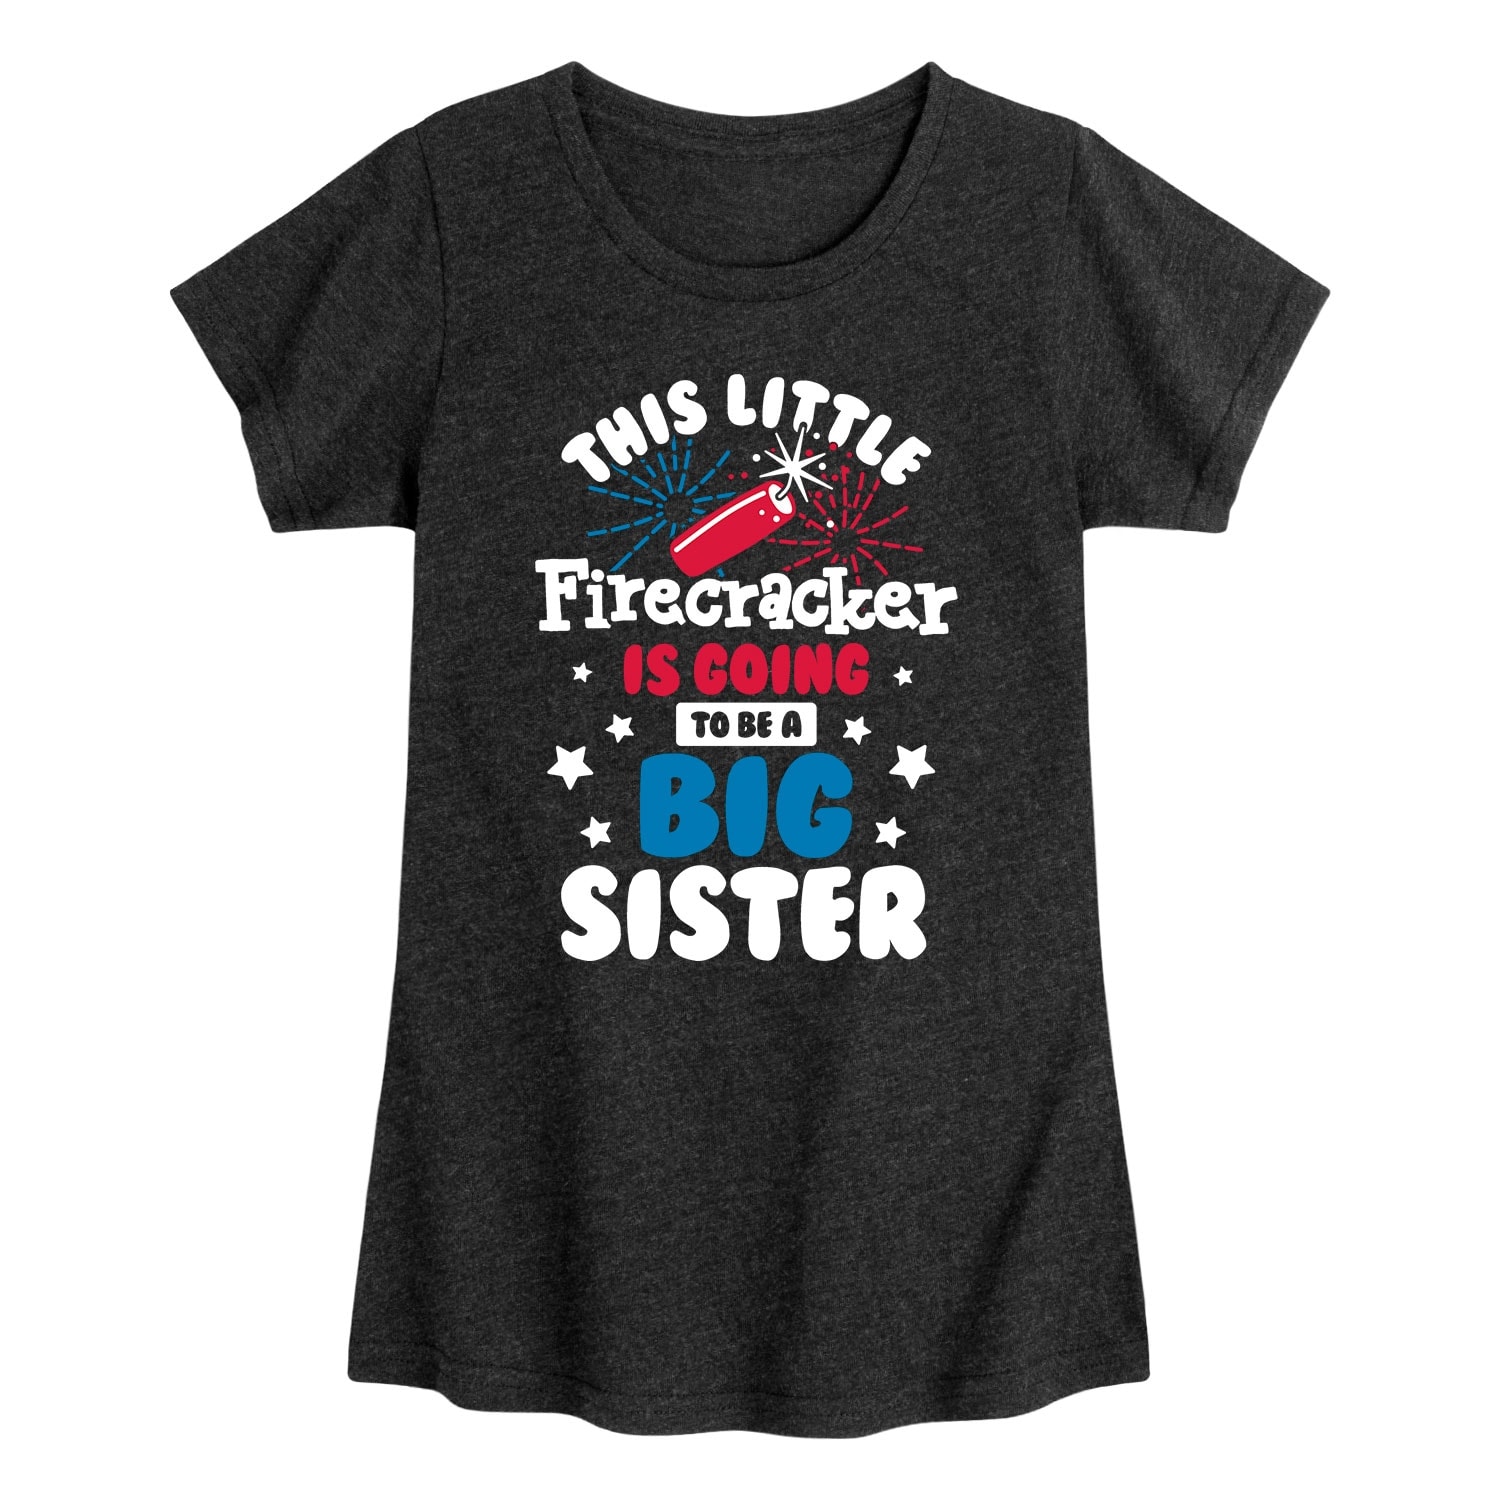 Little Firecracker Big Sister - Girls Toddler And Youth Short Sleeve Graphic T-Shirt - Heather Black